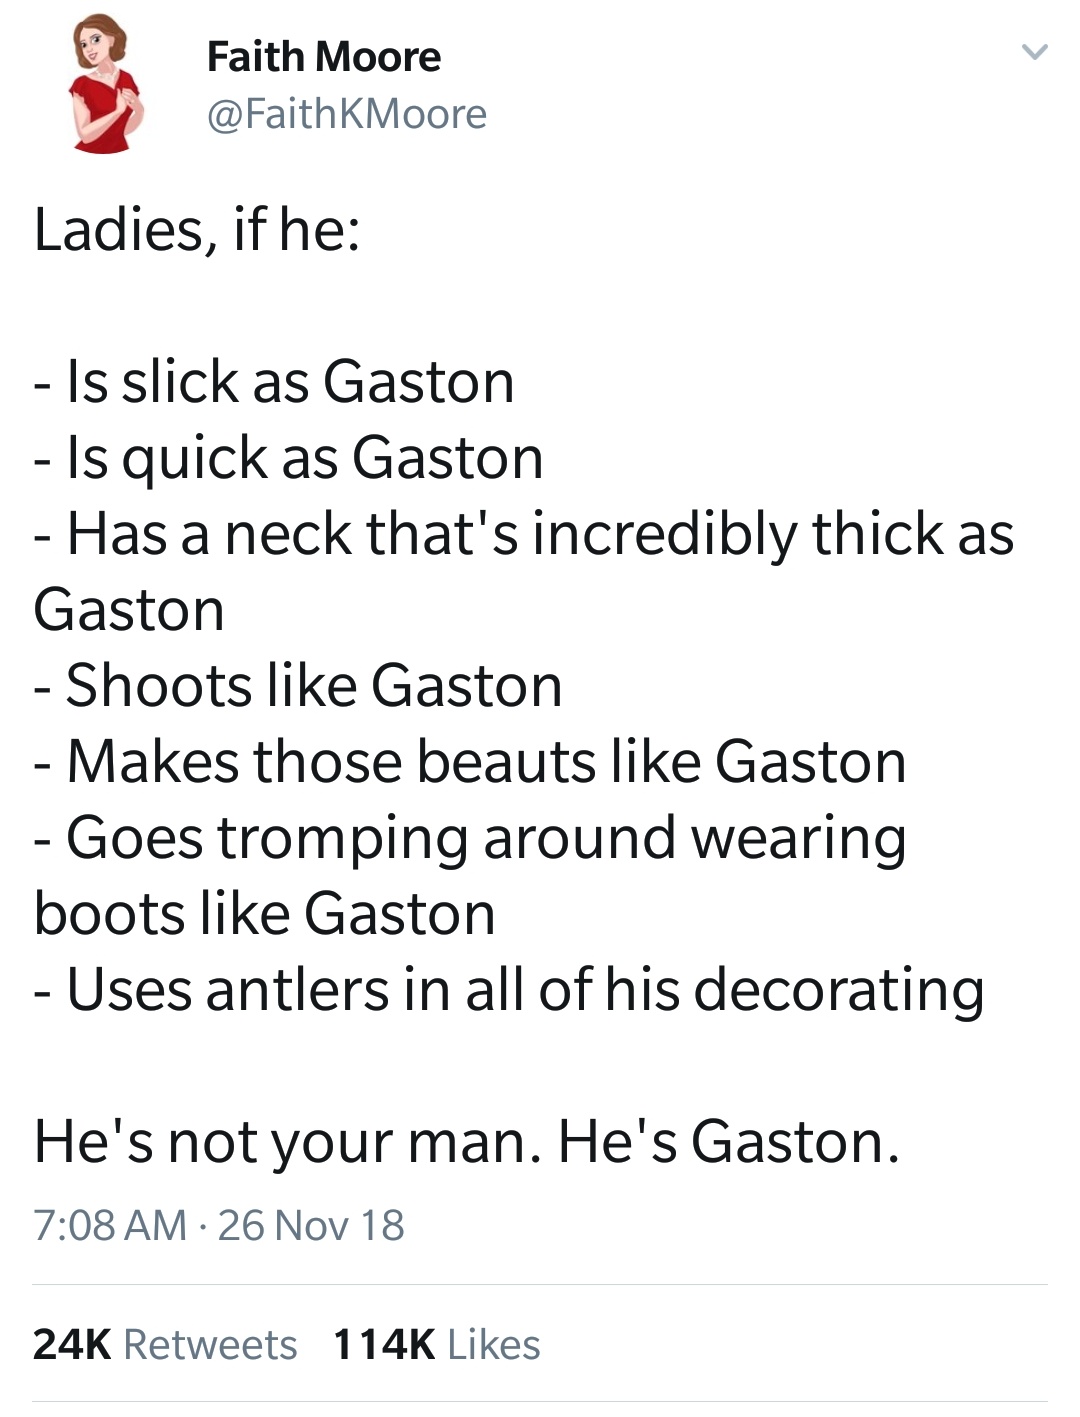 twitter meme angle - Faith Moore Ladies, if he Is slick as Gaston Is quick as Gaston Has a neck that's incredibly thick as Gaston Shoots Gaston Makes those beauts Gaston Goes tromping around wearing boots Gaston Uses antlers in all of his decorating He's 